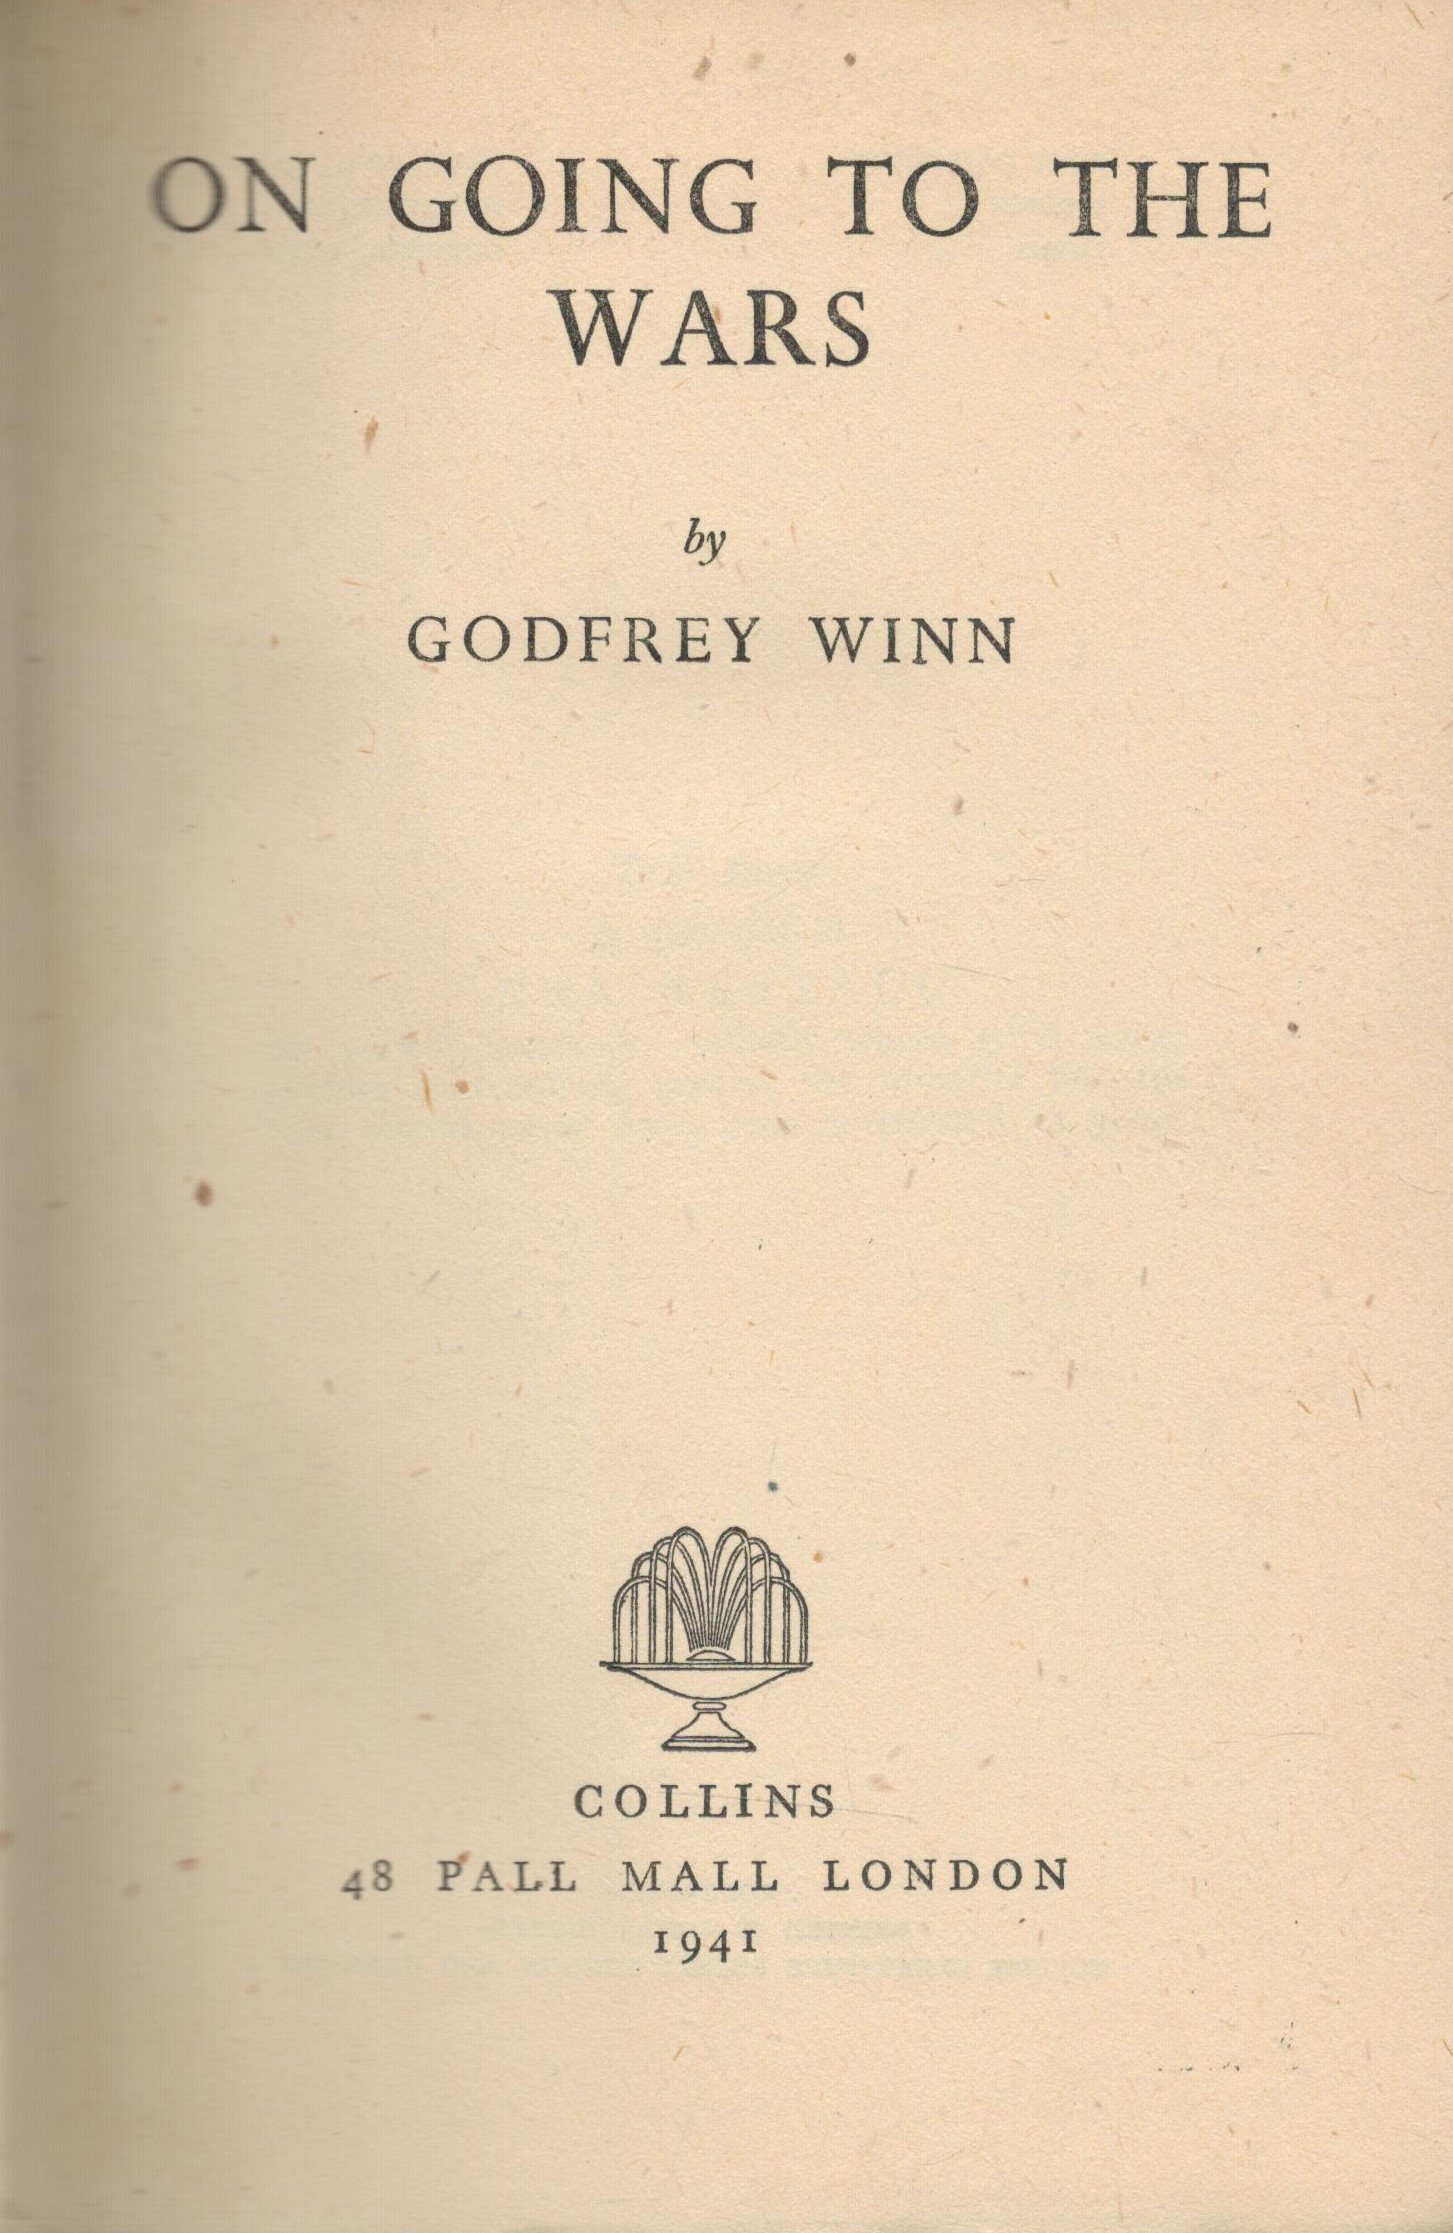 Godfrey Winn. On Going To The Wars. WW2 hardback book. Showing signs of age. Dedicated. Signed by - Image 3 of 4